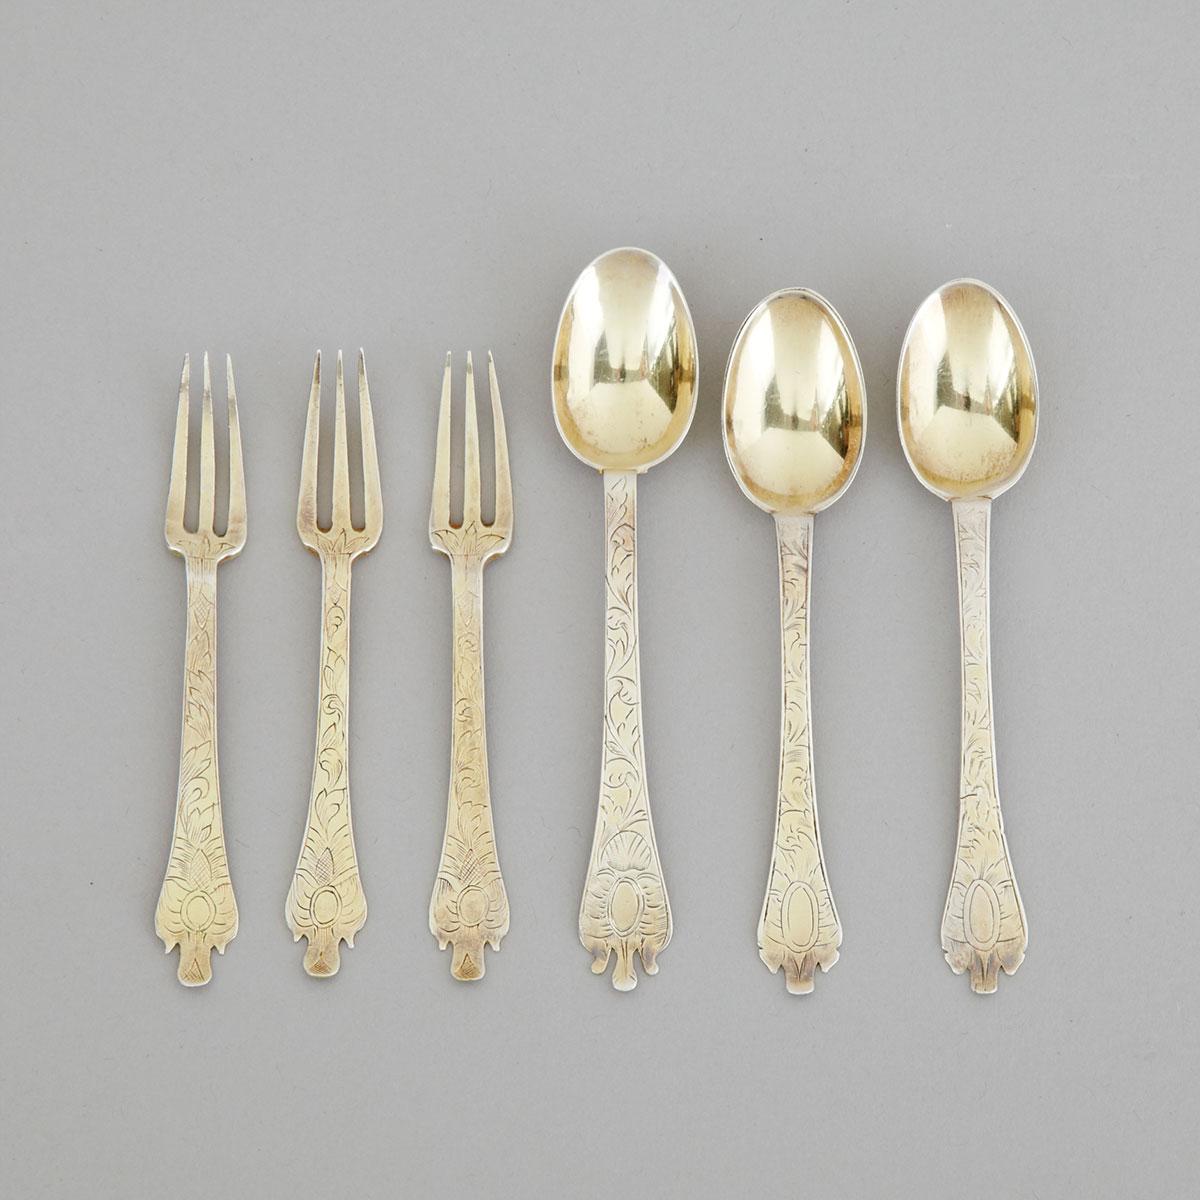 Three Late 17th Century Engraved Silver-Gilt Small Trefid Spoons and Three Forks, c.1690-1700